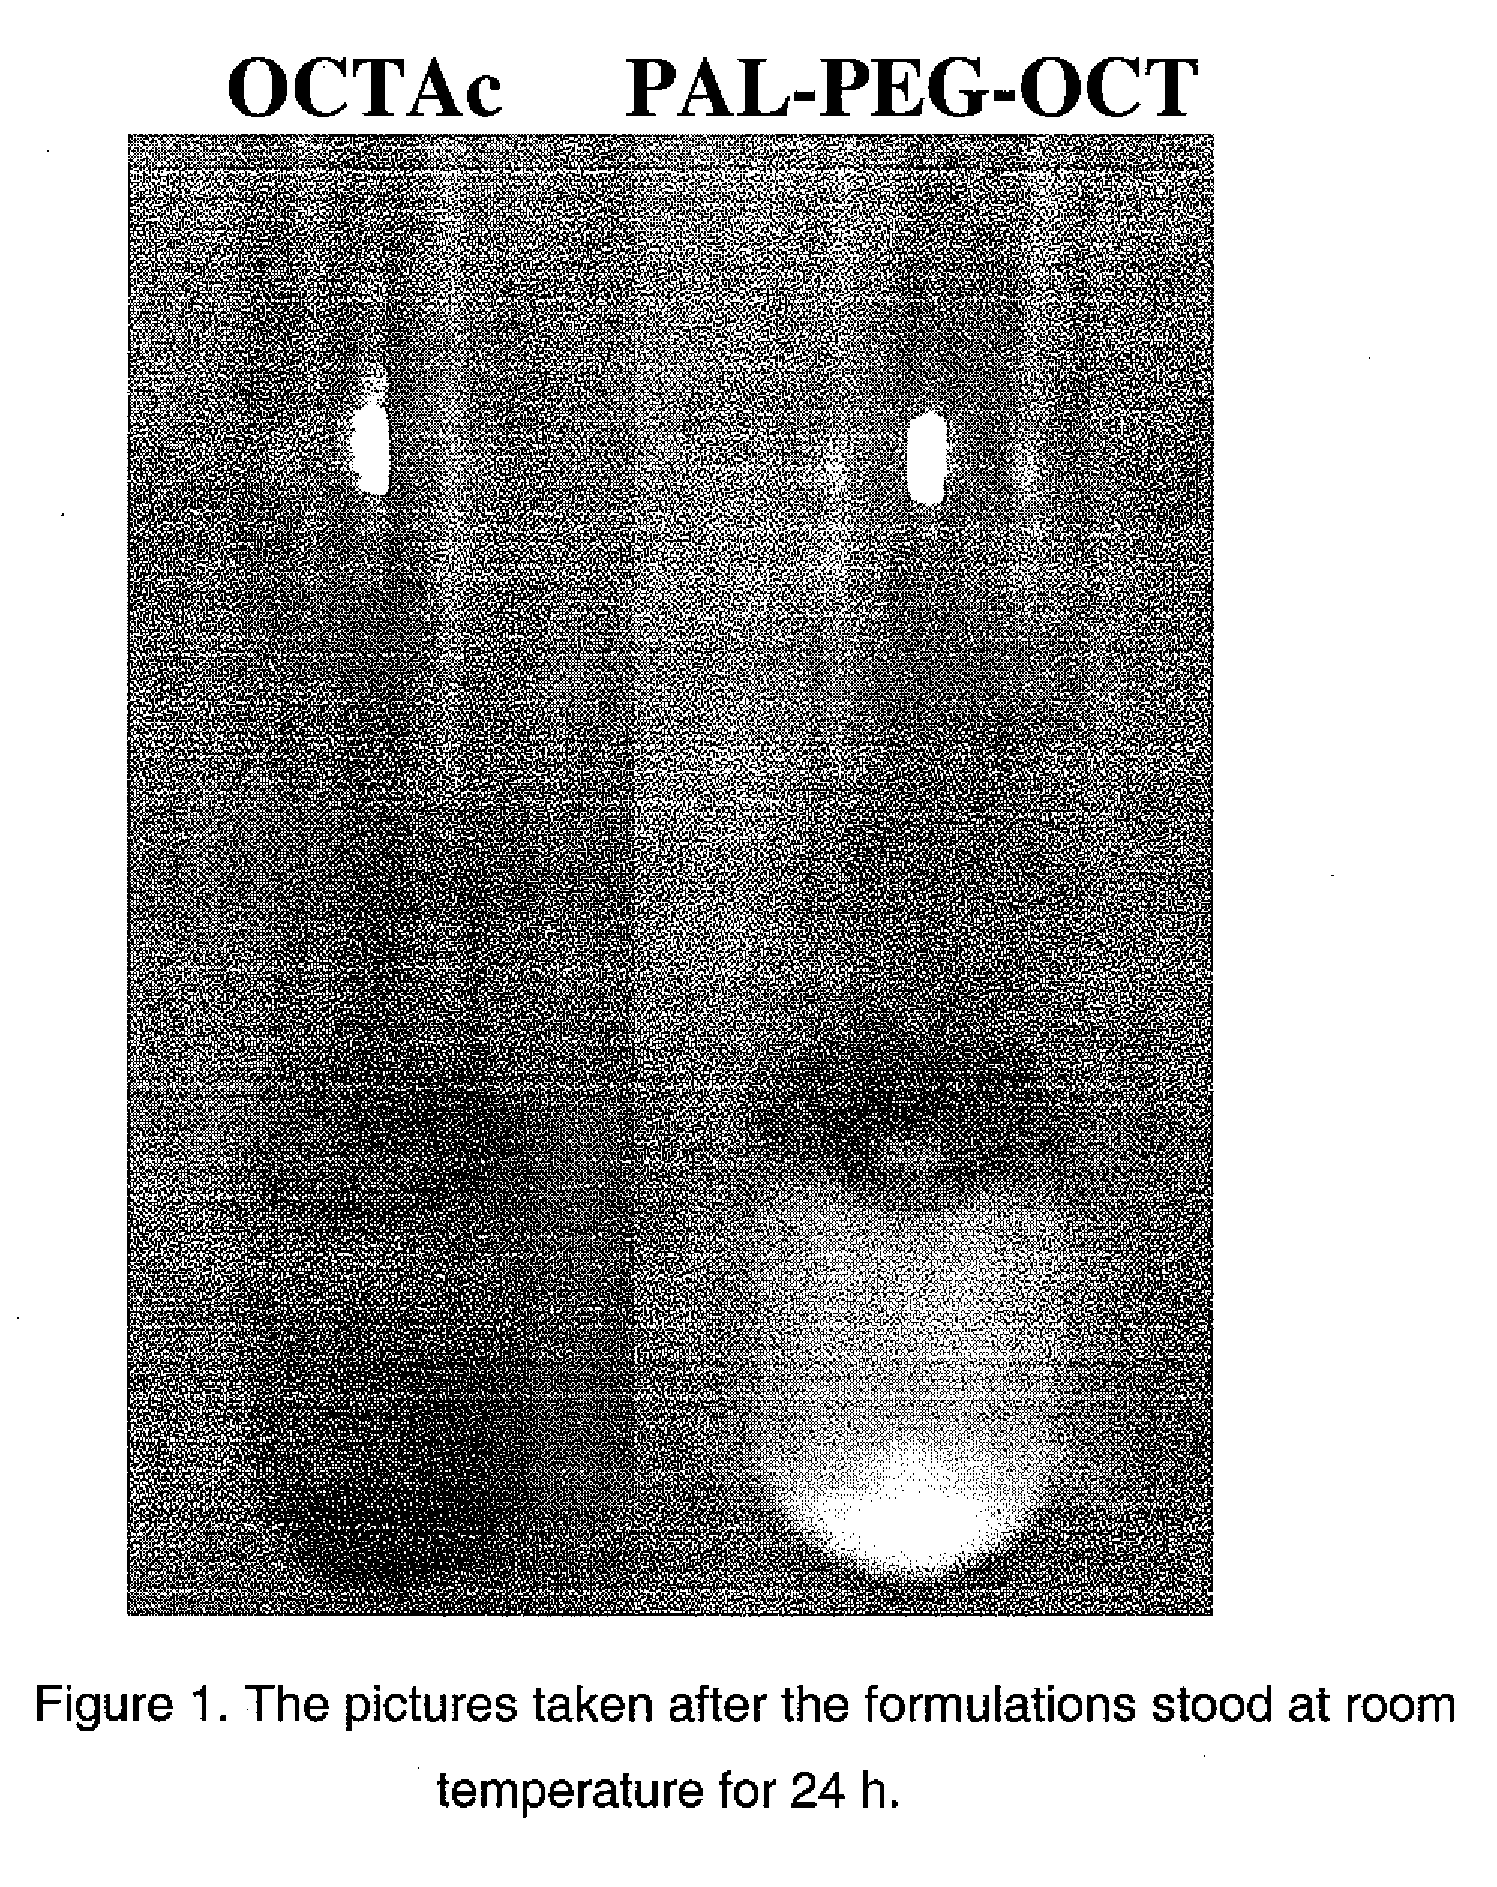 Composition for Sustained Release Delivery of Proteins or Peptides